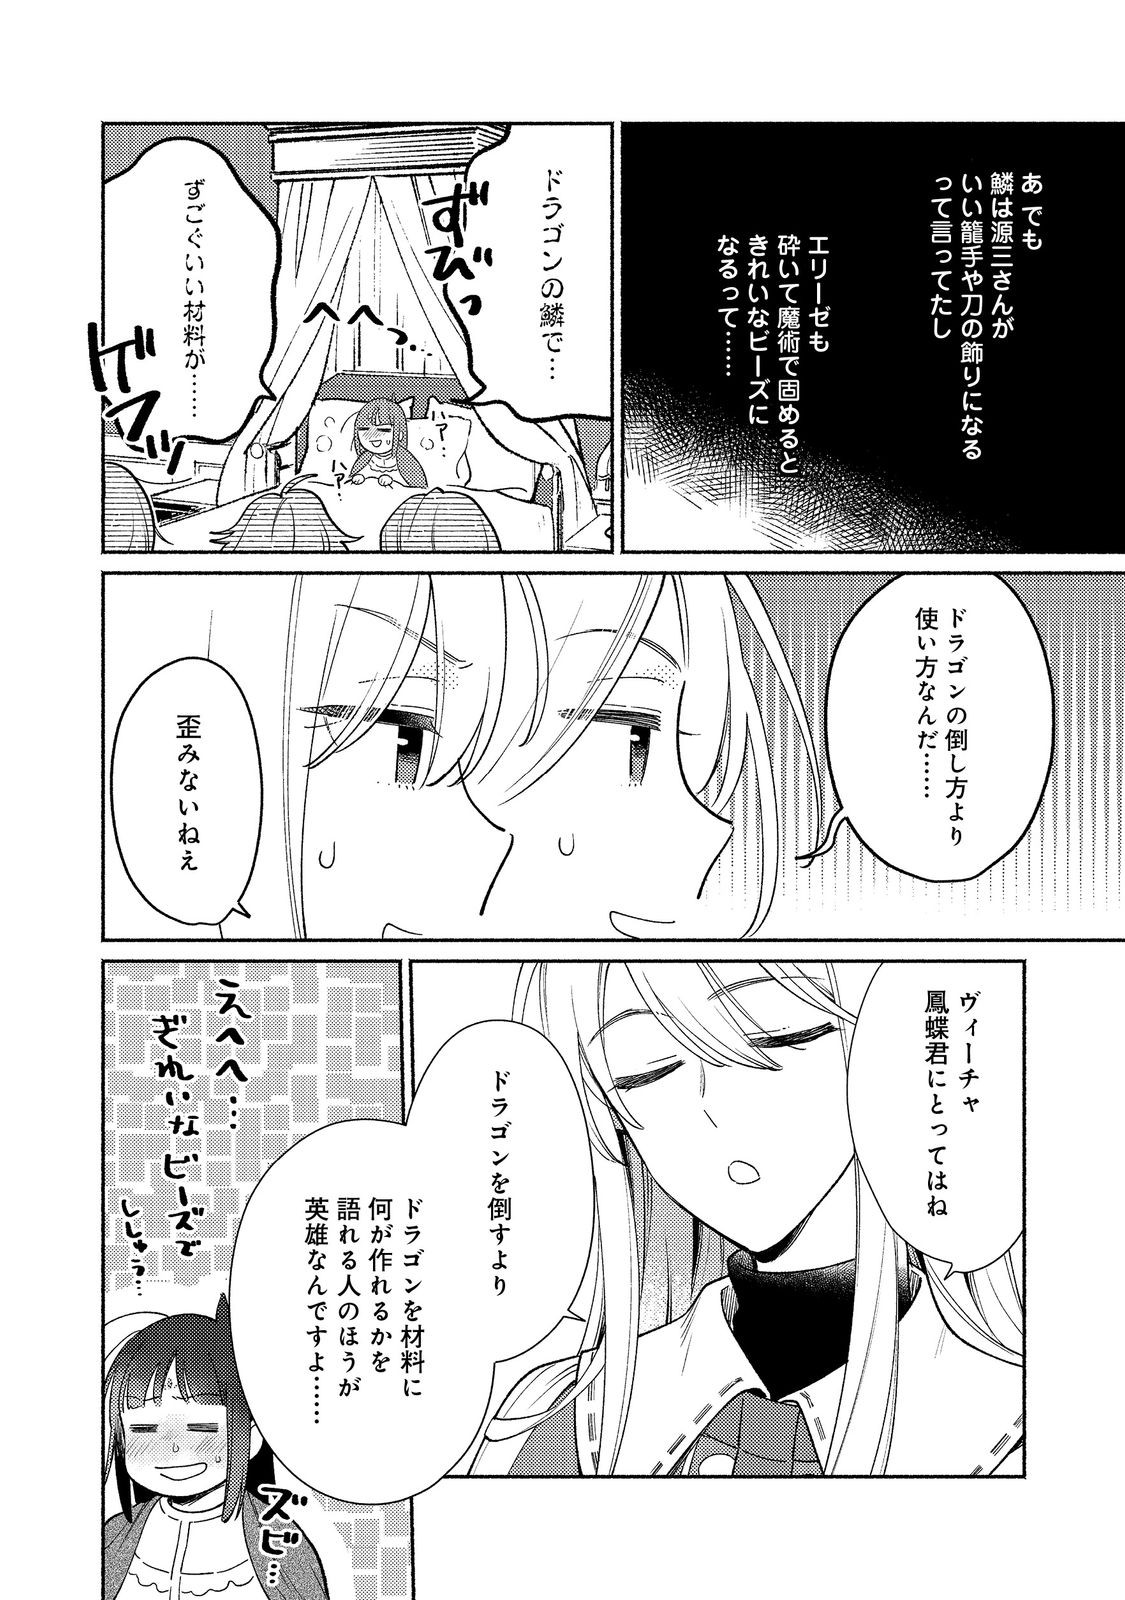 I’m the White Pig Nobleman 第21.2話 - Page 14